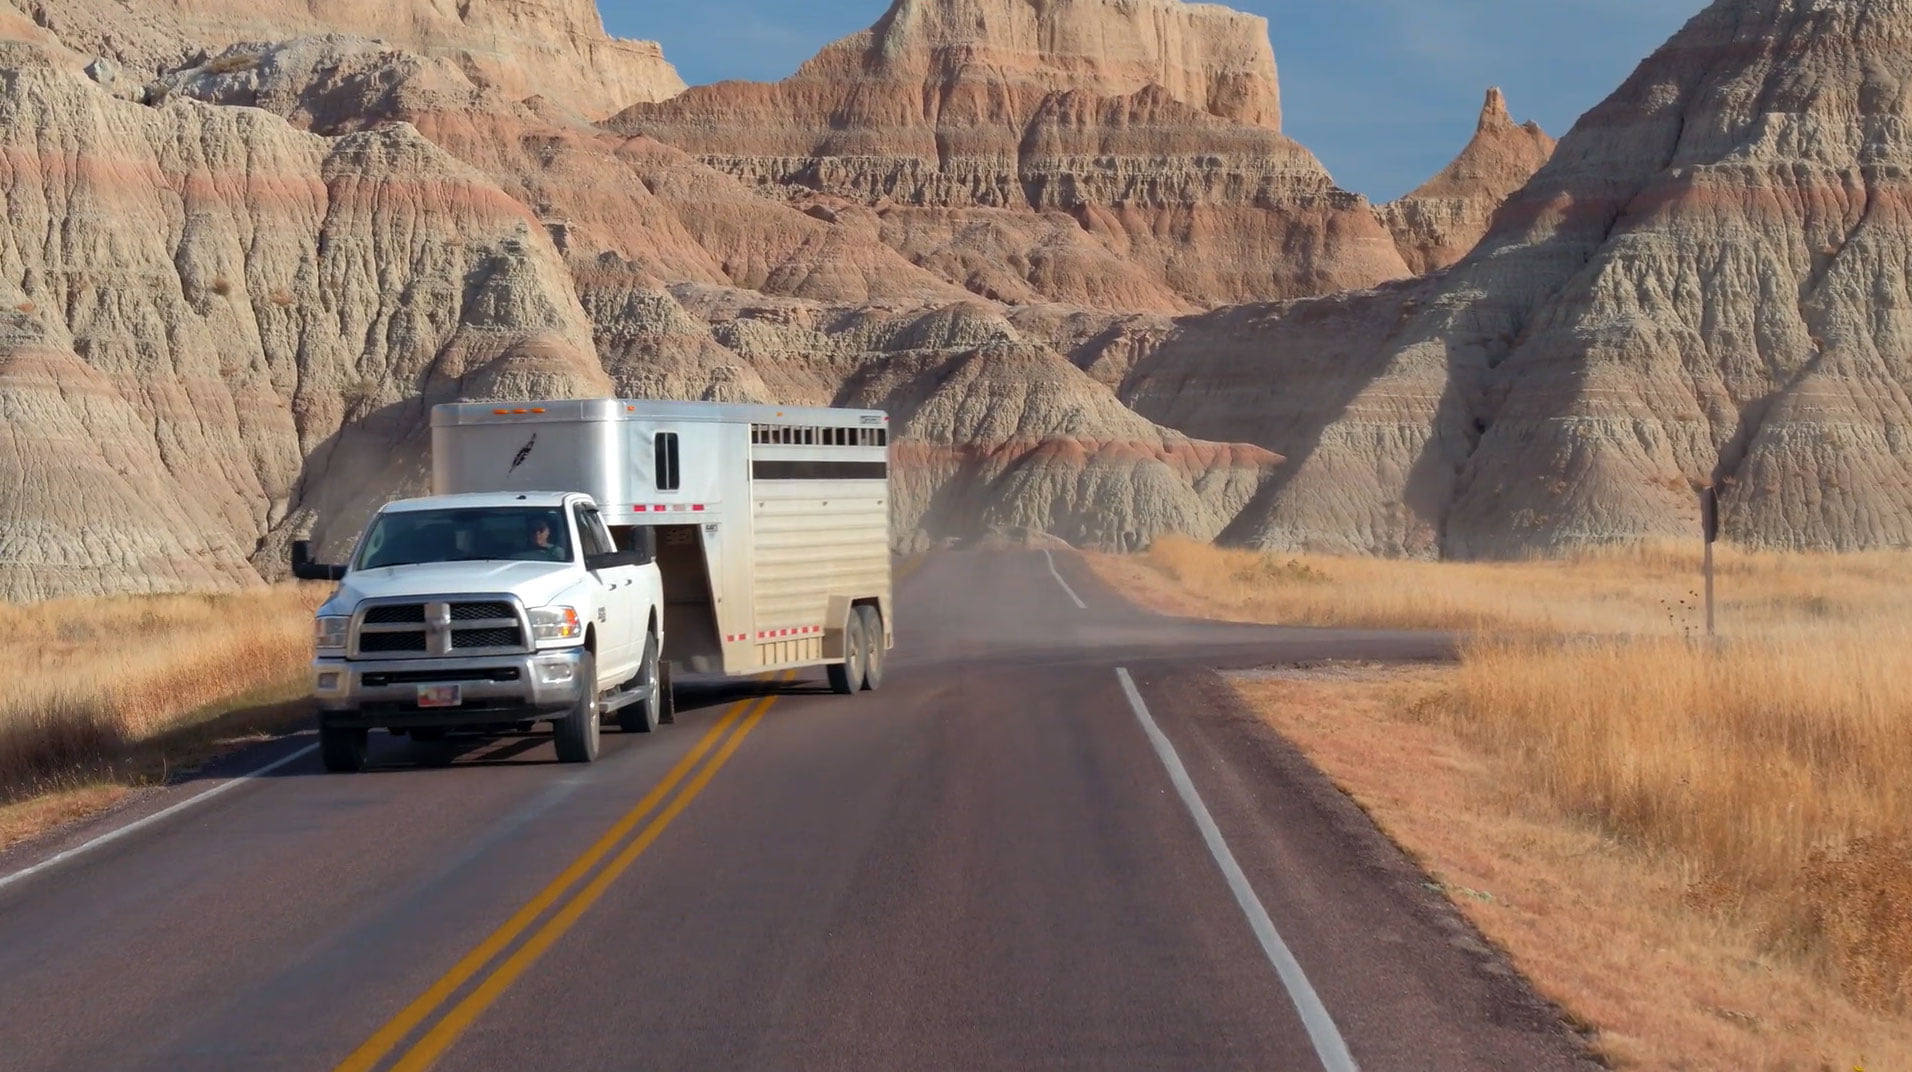 Featured image for “RV Gooseneck Hitch: The Key to Efficient and Safe RV Towing”